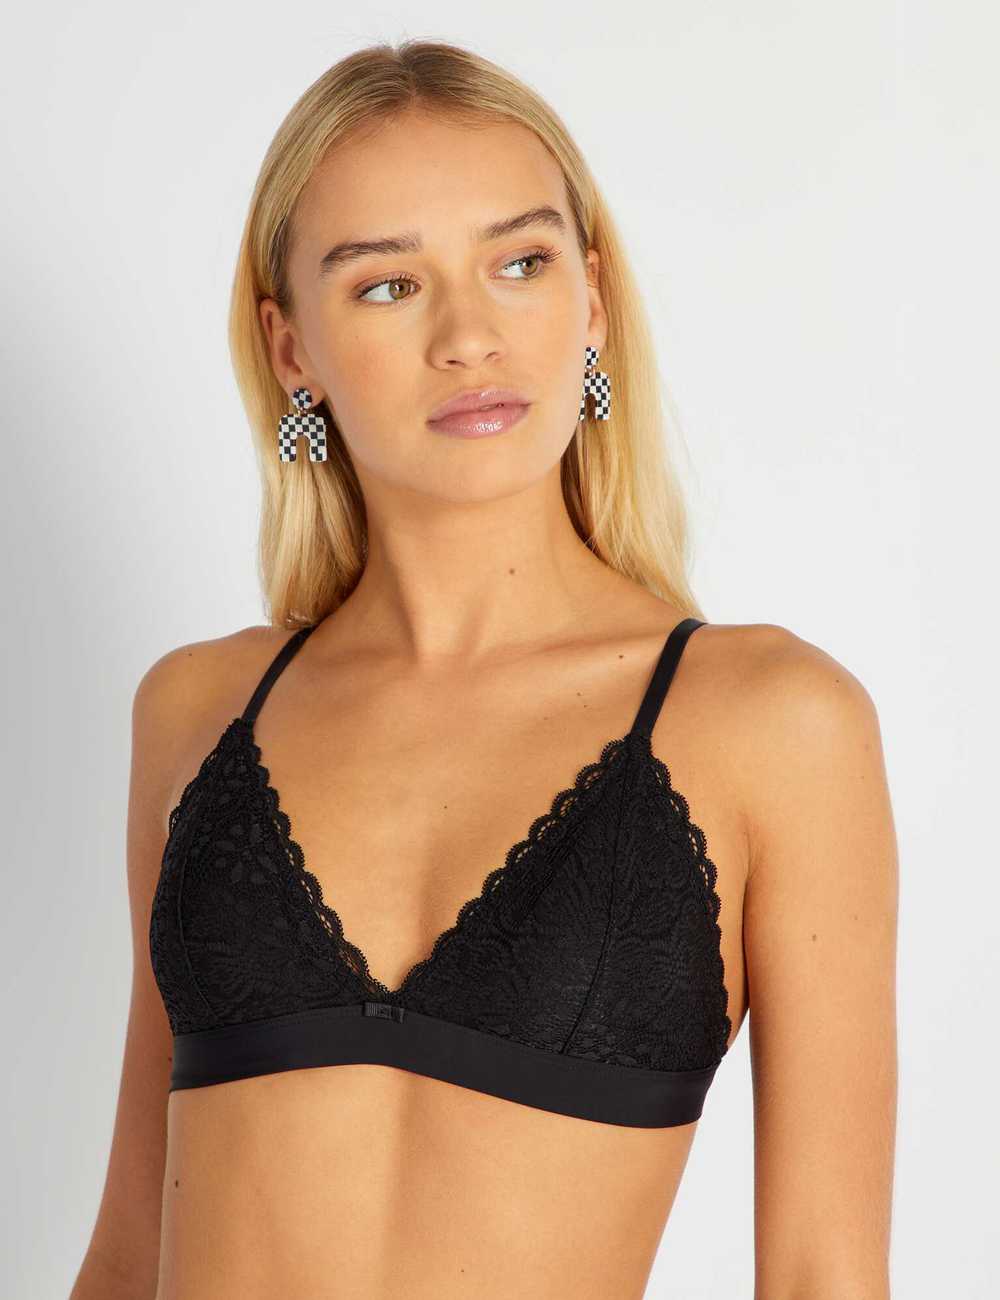 Buy Lace triangle bra with removable padding Online in Dubai & the